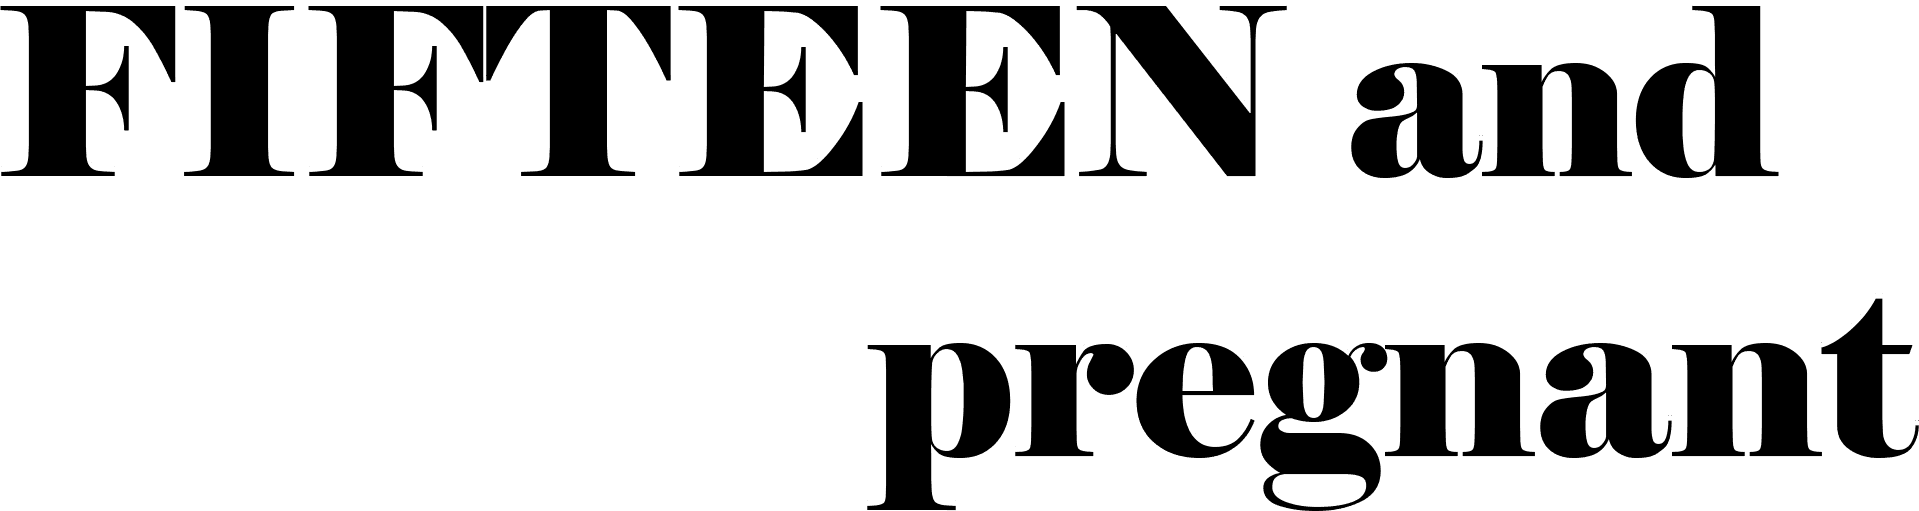 Fifteen and Pregnant logo